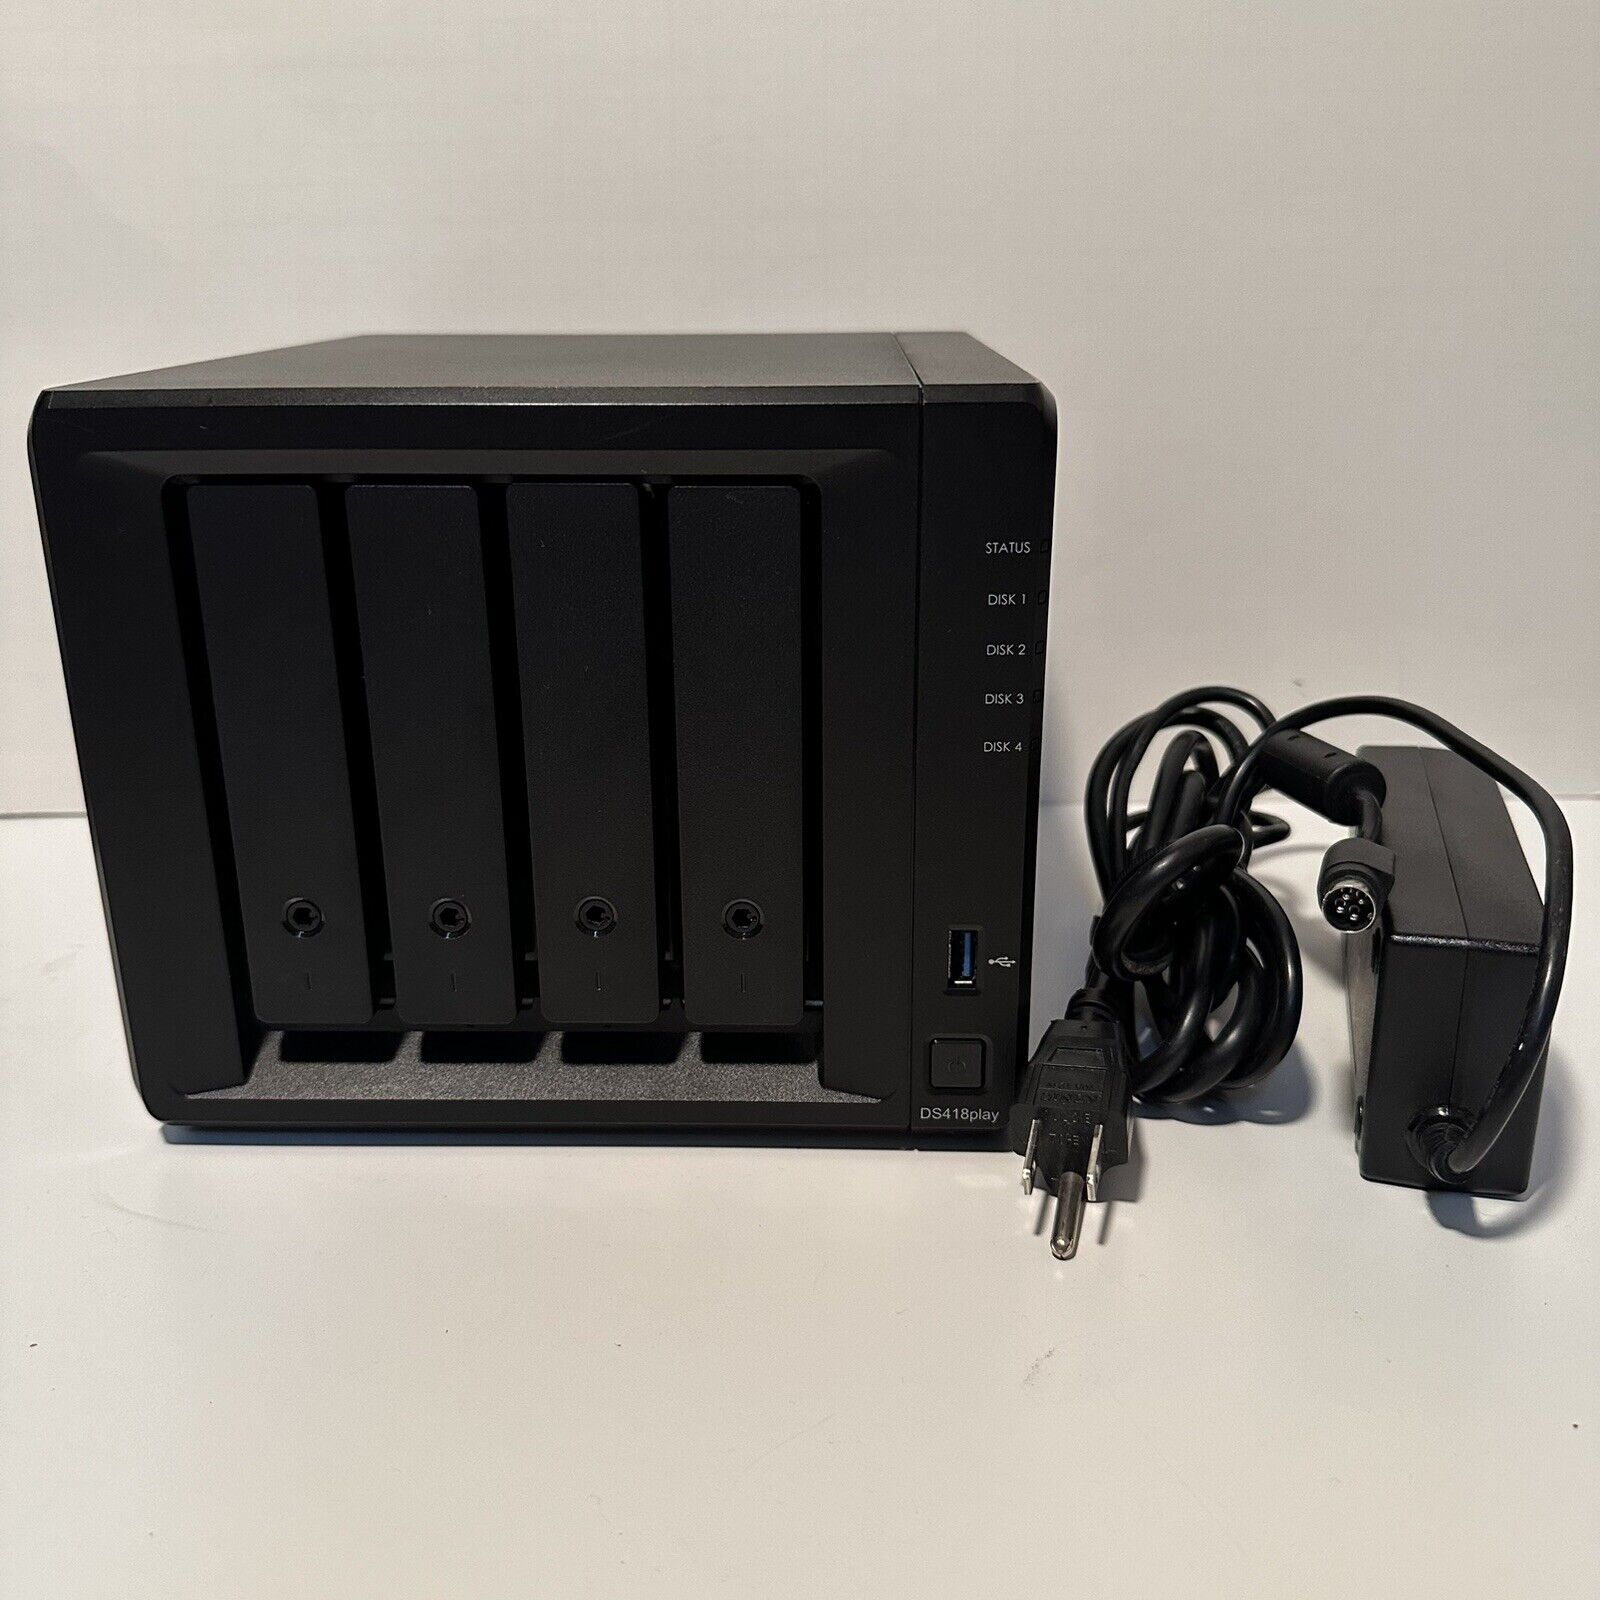 Synology DiskStation DS418play 4-bay NAS Untested